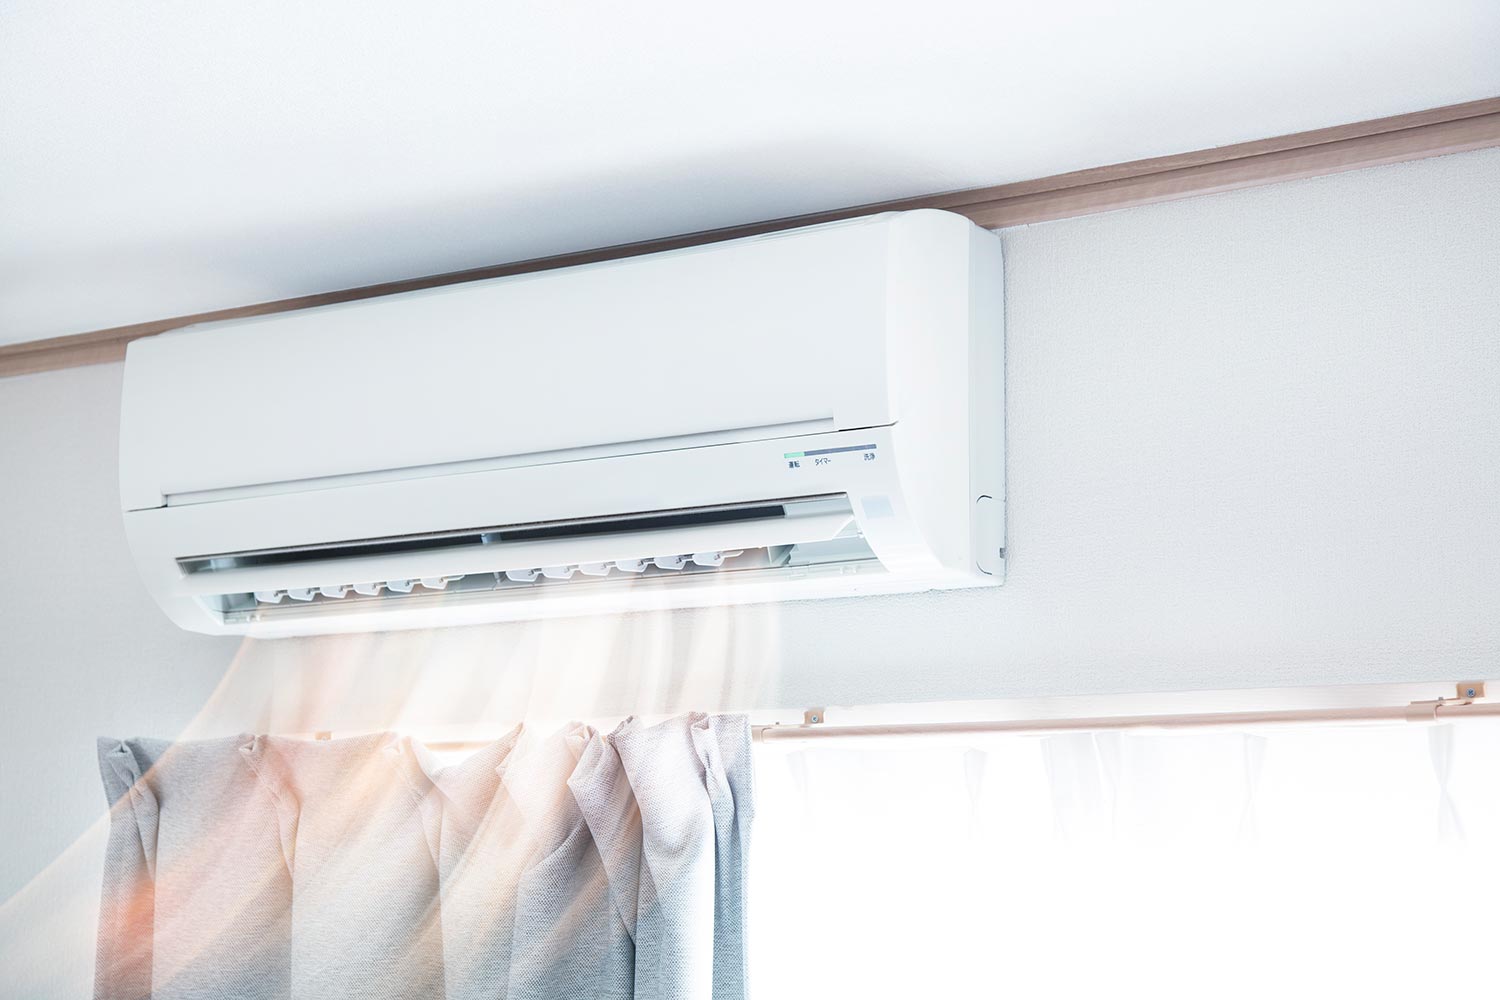 Air conditioner blowing warm air